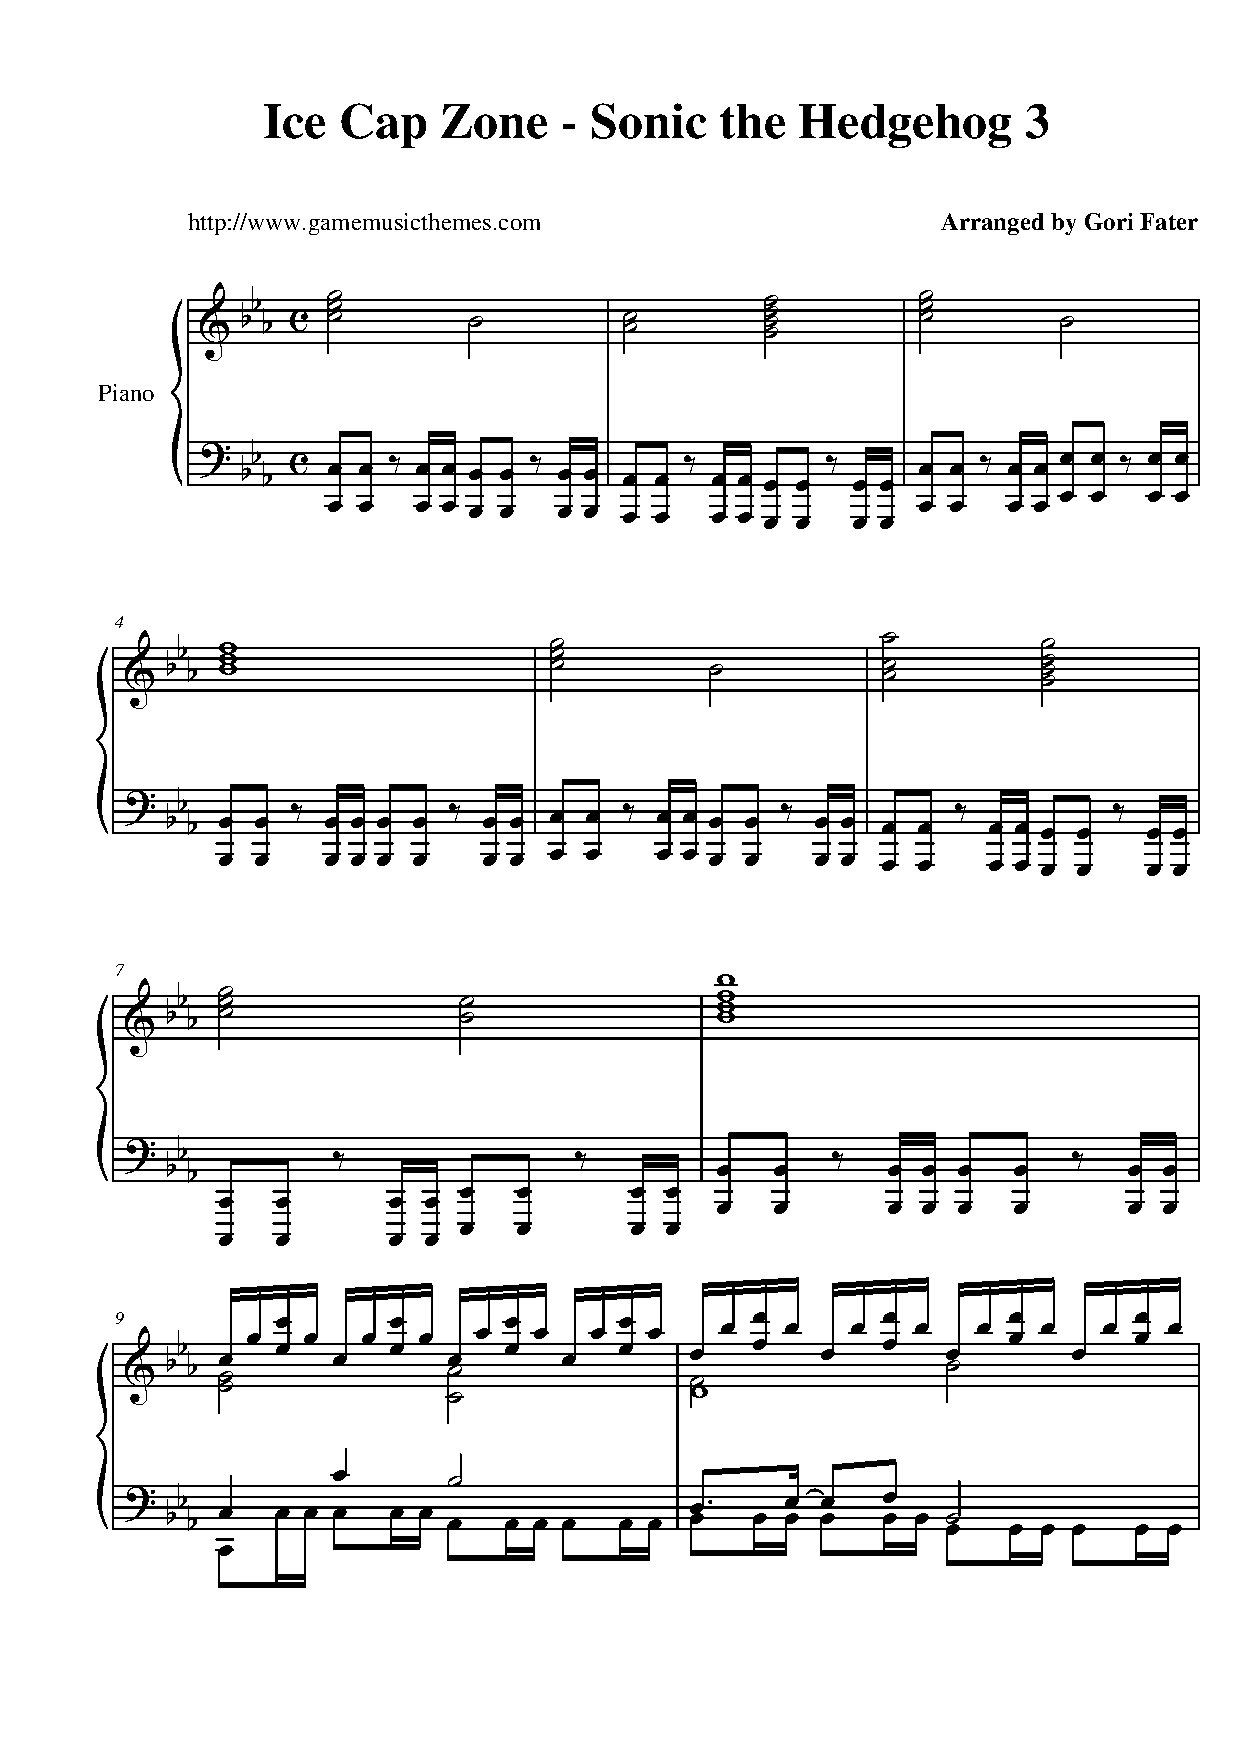 Credits Theme - Sonic The Hedgehog 3: Orchestrated Sheet music for Piano,  Trombone, Soprano, Alto & more instruments (Mixed Ensemble)